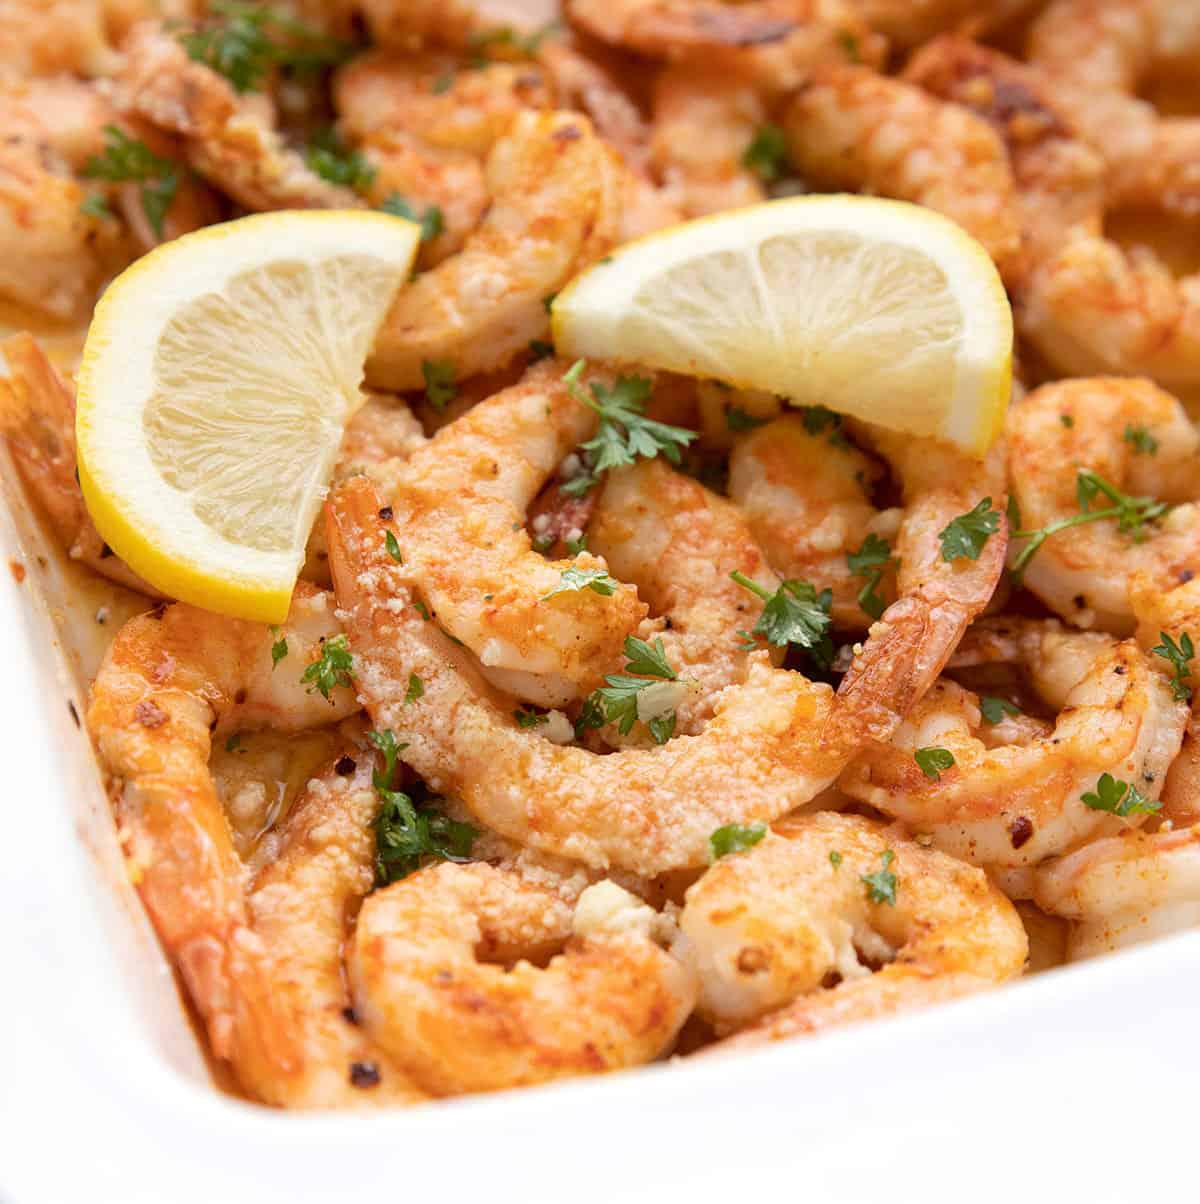 How to Cook Shrimp So They're Juicy, Not Rubbery